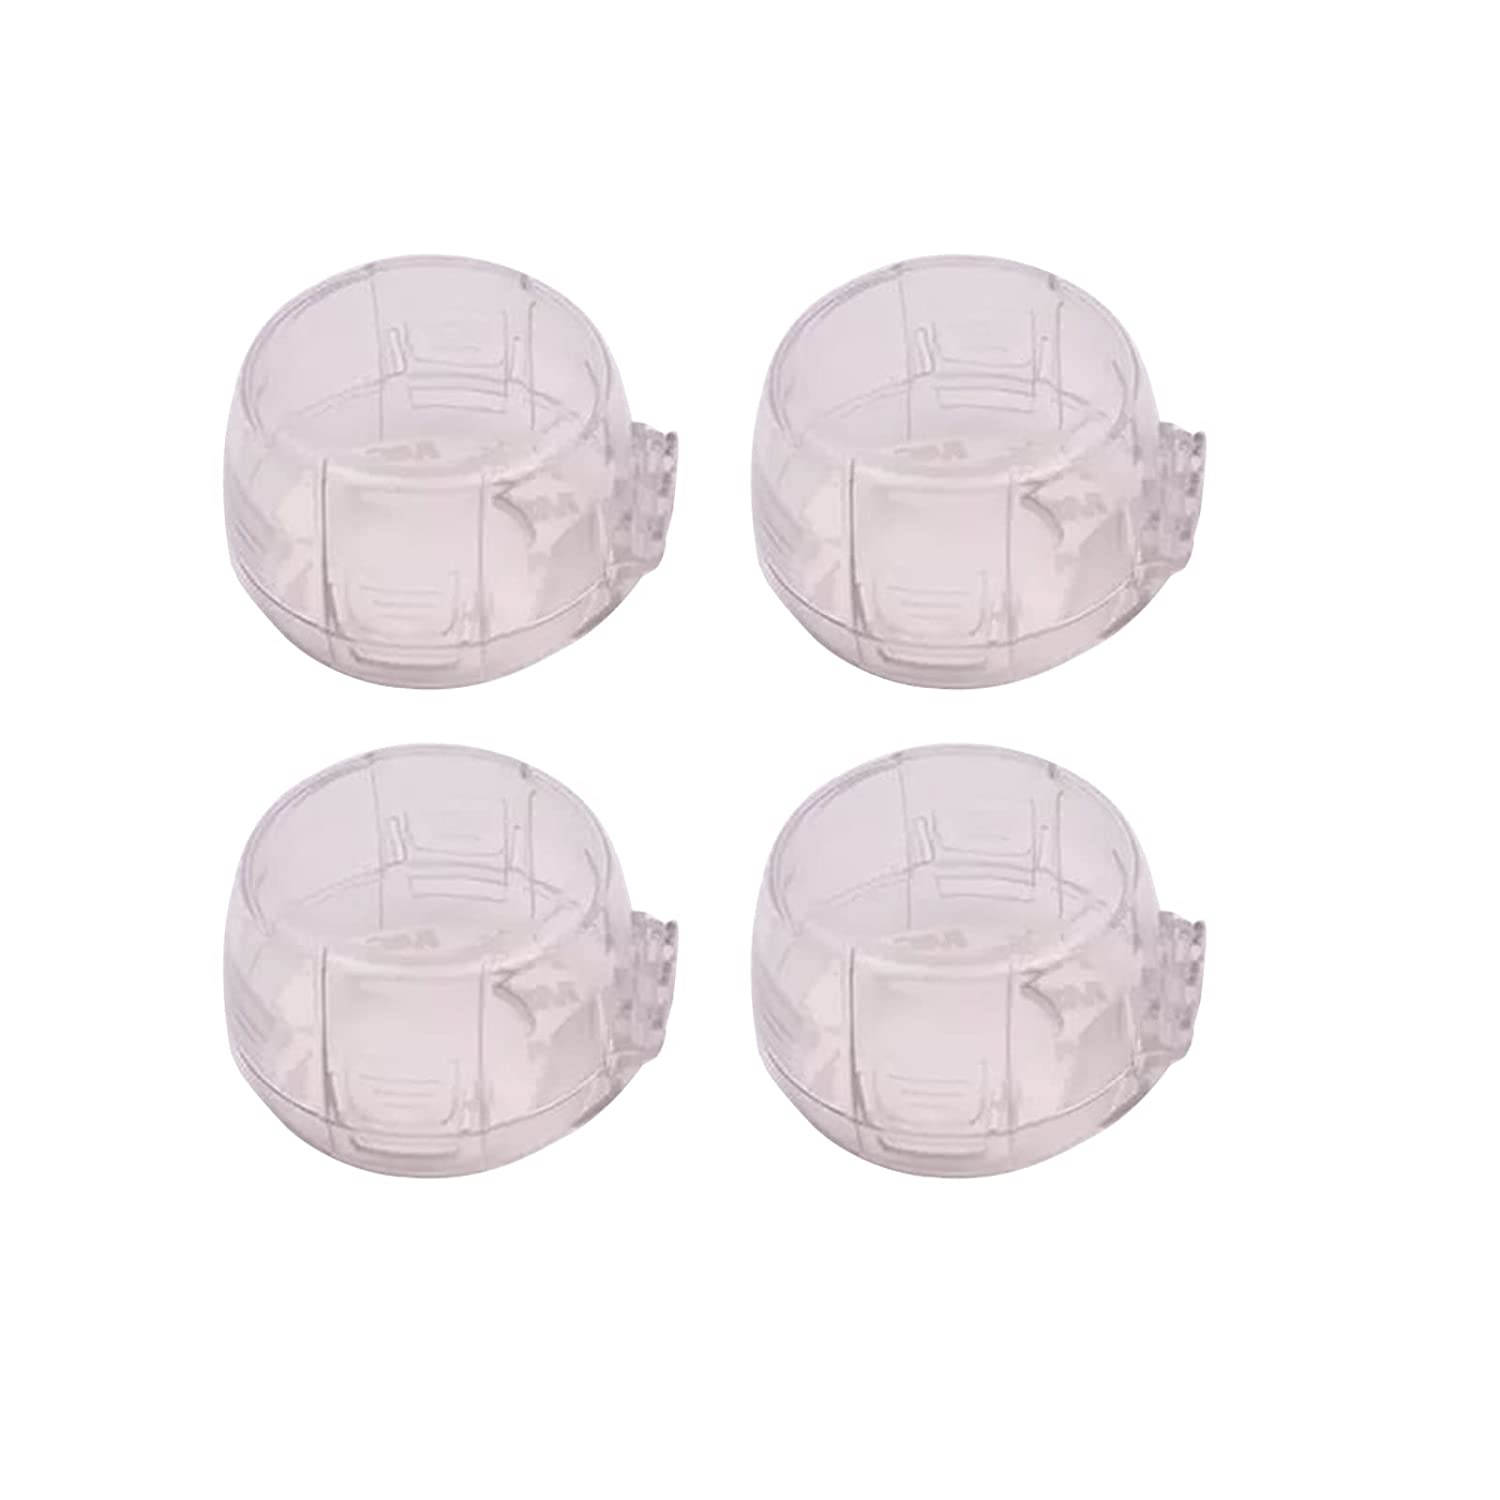 Transparent Gas Stove Knob Cover for Child Safety